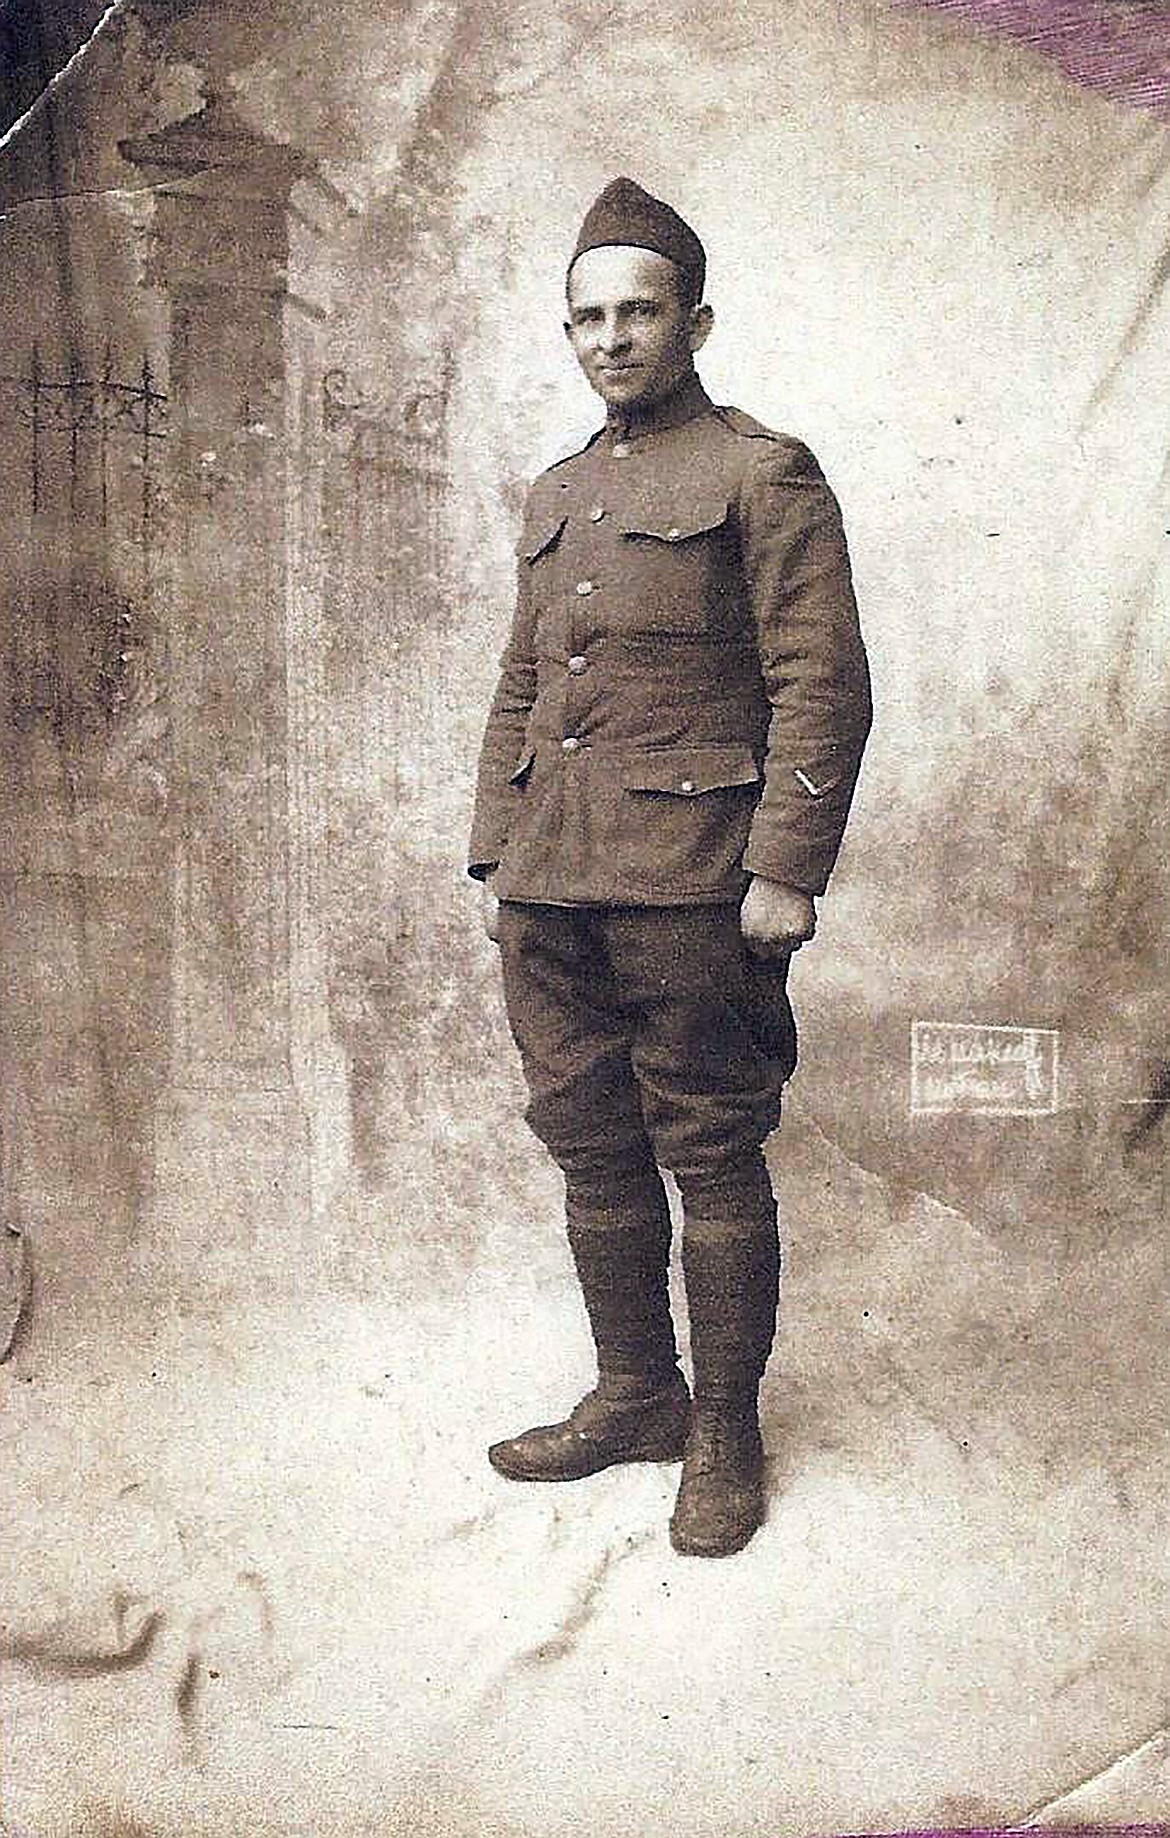 Harry F. Clark is pictured in a postcard he sent to a friend from the Meuse Argonne in 1918-'19.